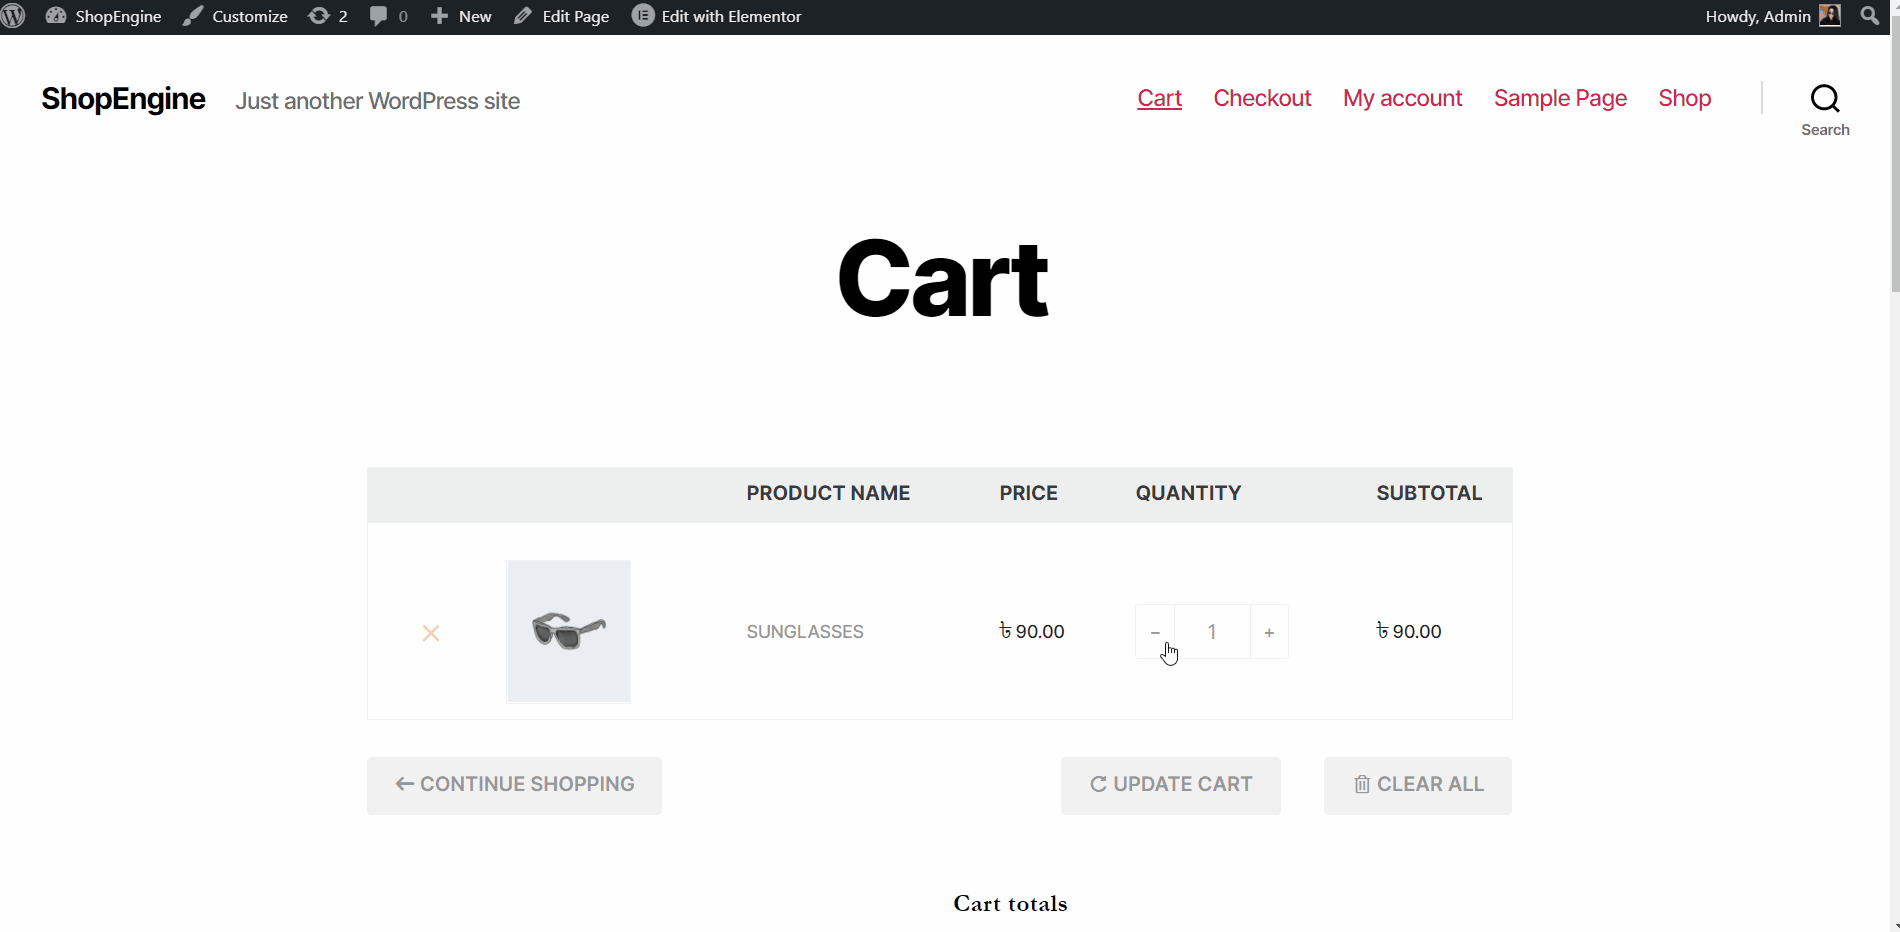 Empty cart template page shows up on front-end